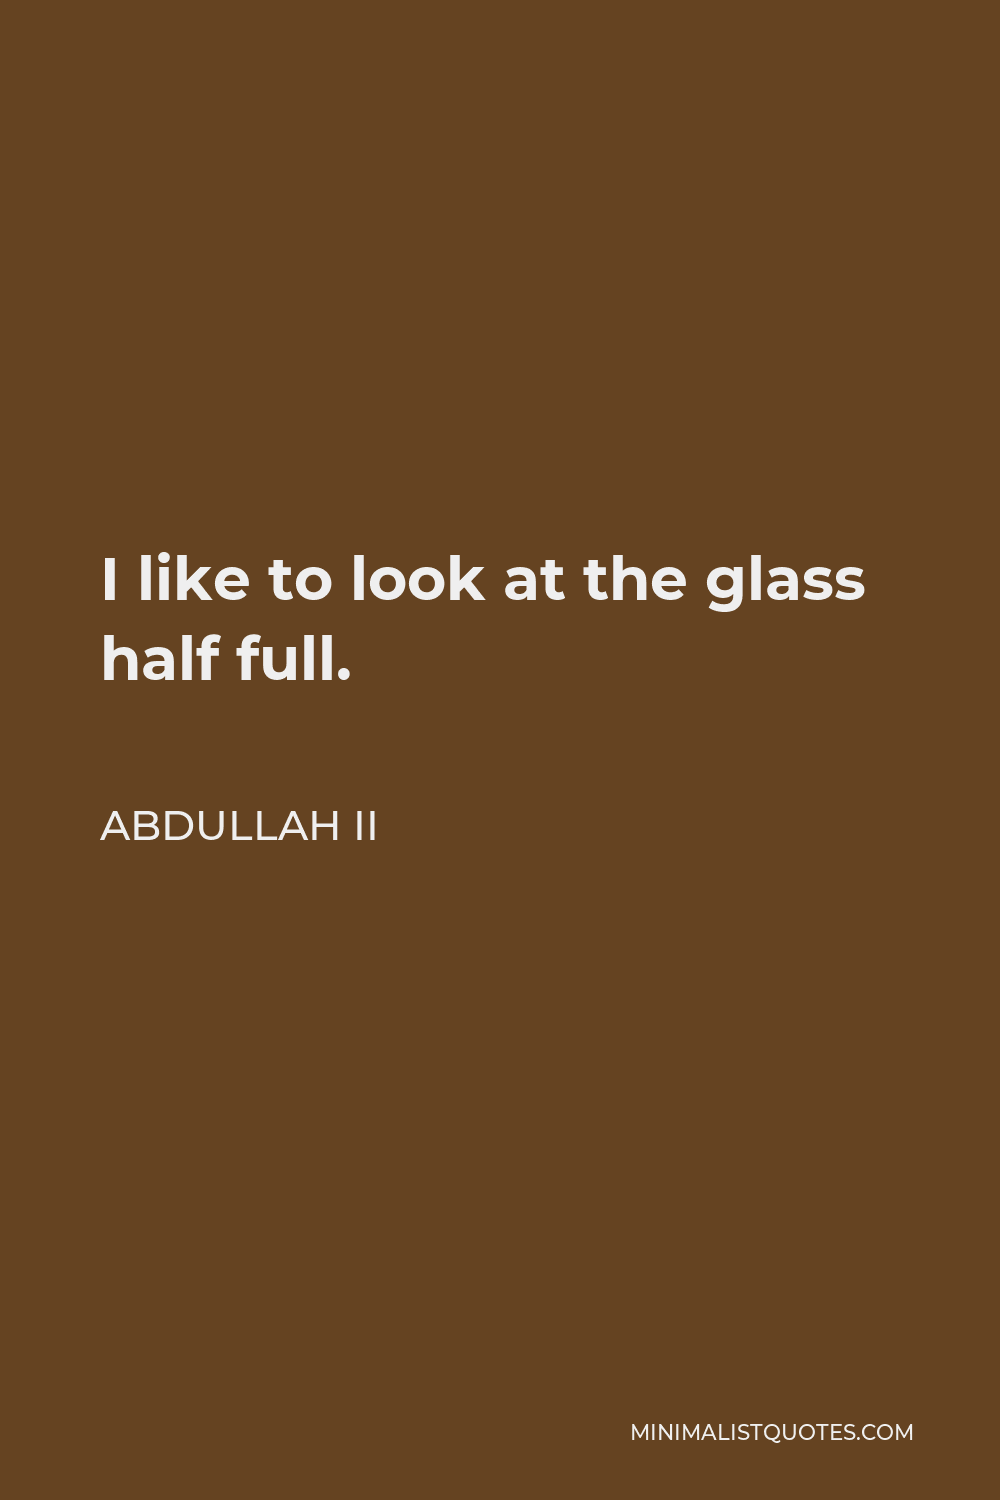 Abdullah II Quote - I like to look at the glass half full.